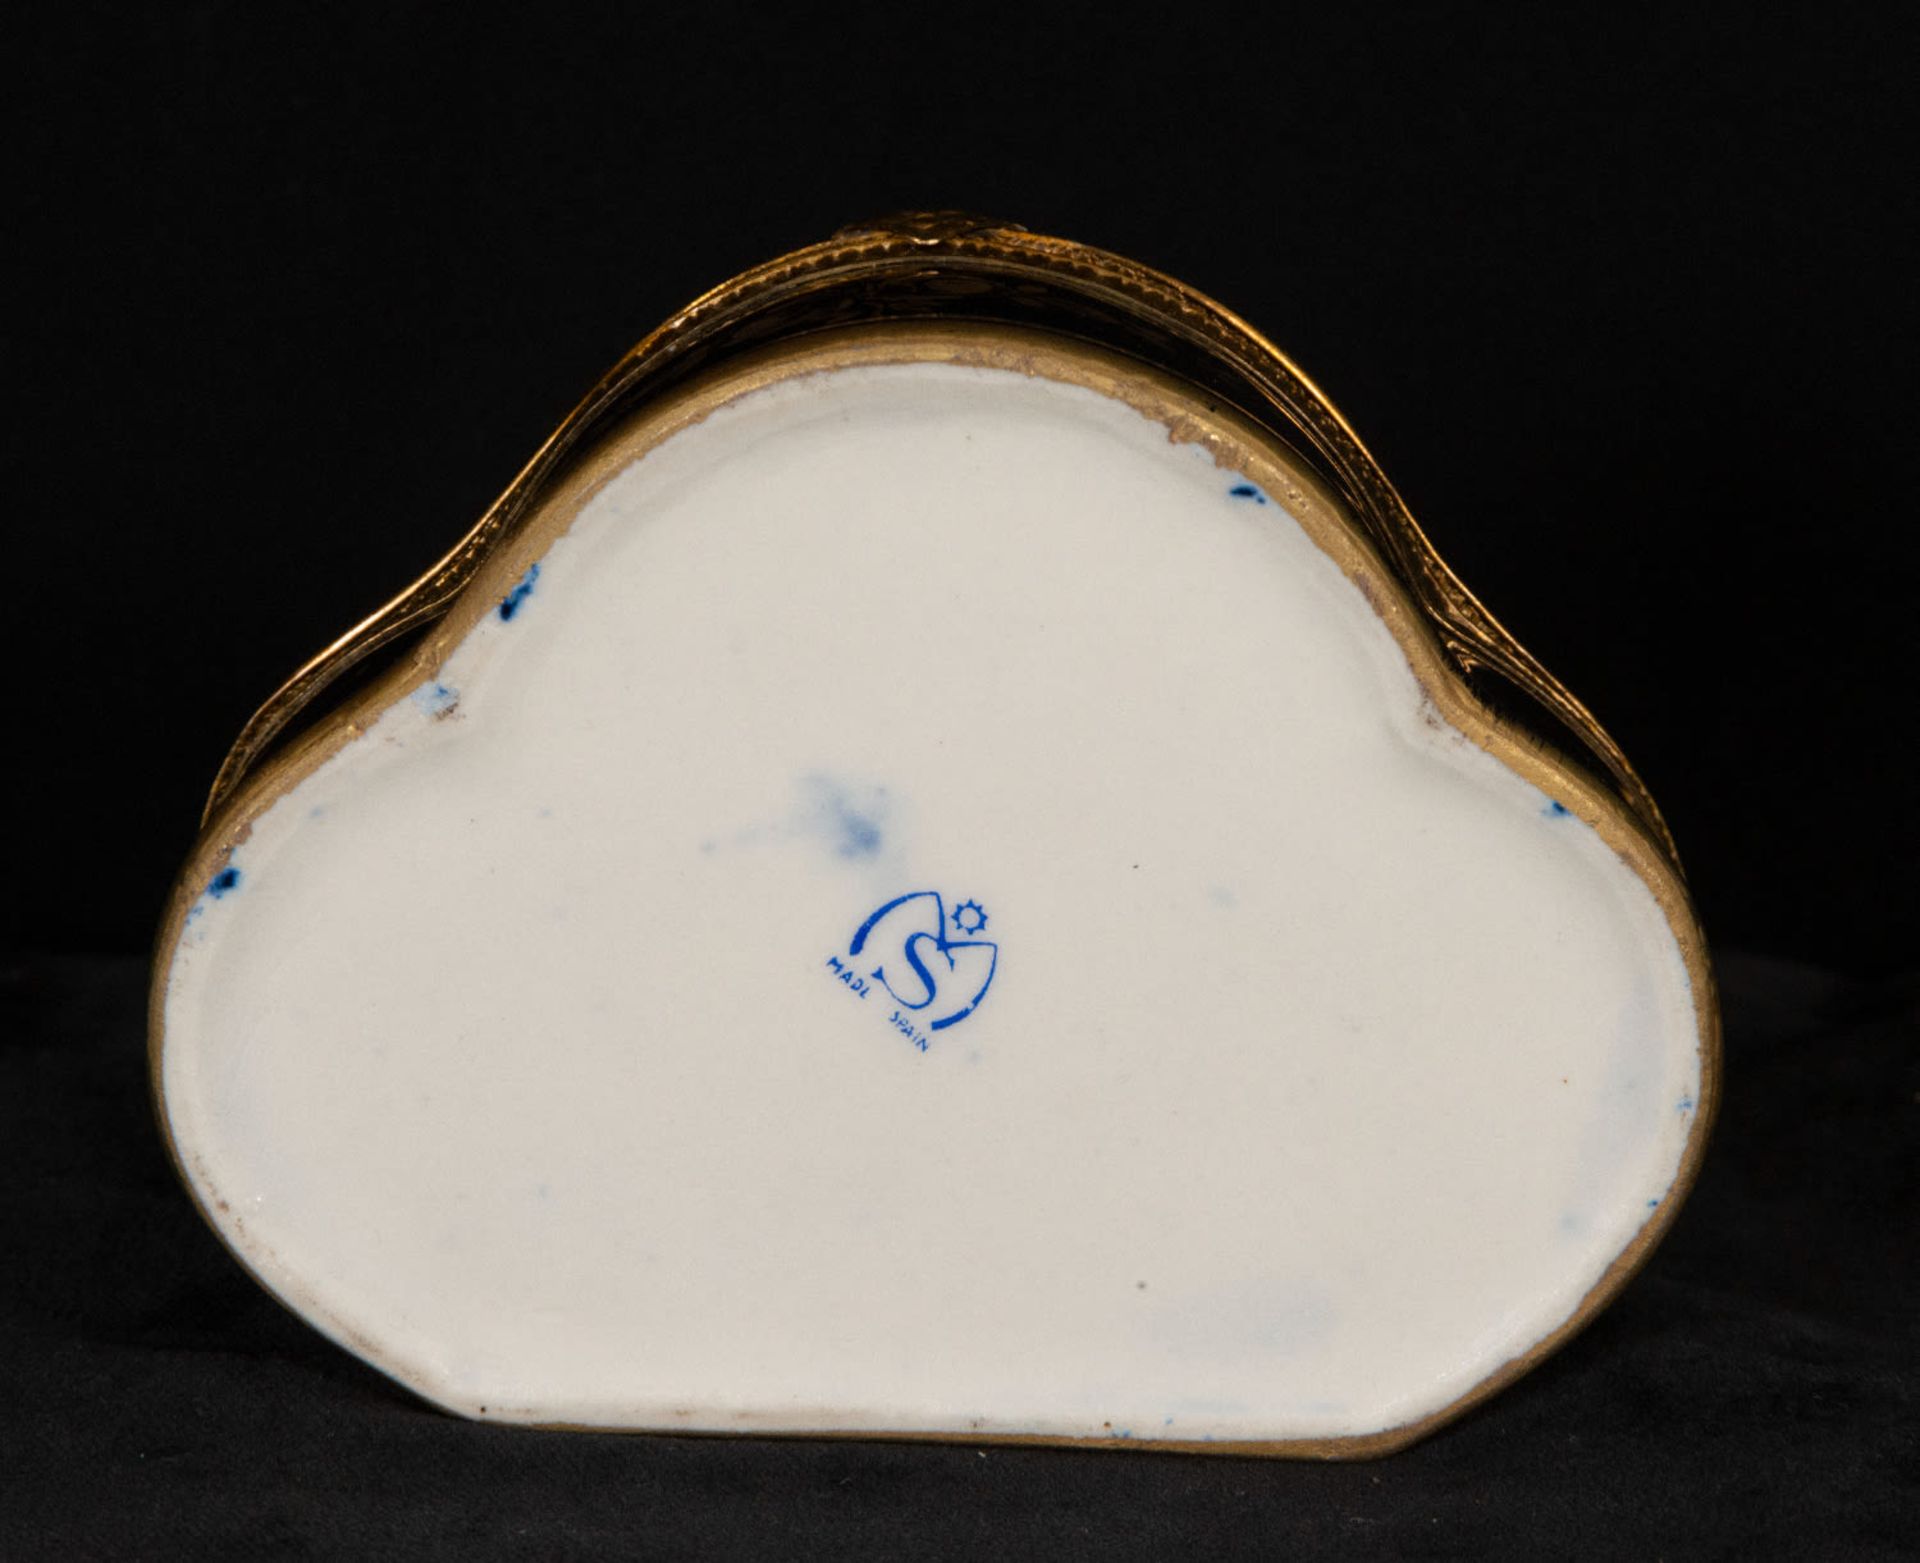 Pair of Sèvres porcelain dressing table jewelry boxes and porcelain swan, 19th century - Image 9 of 10